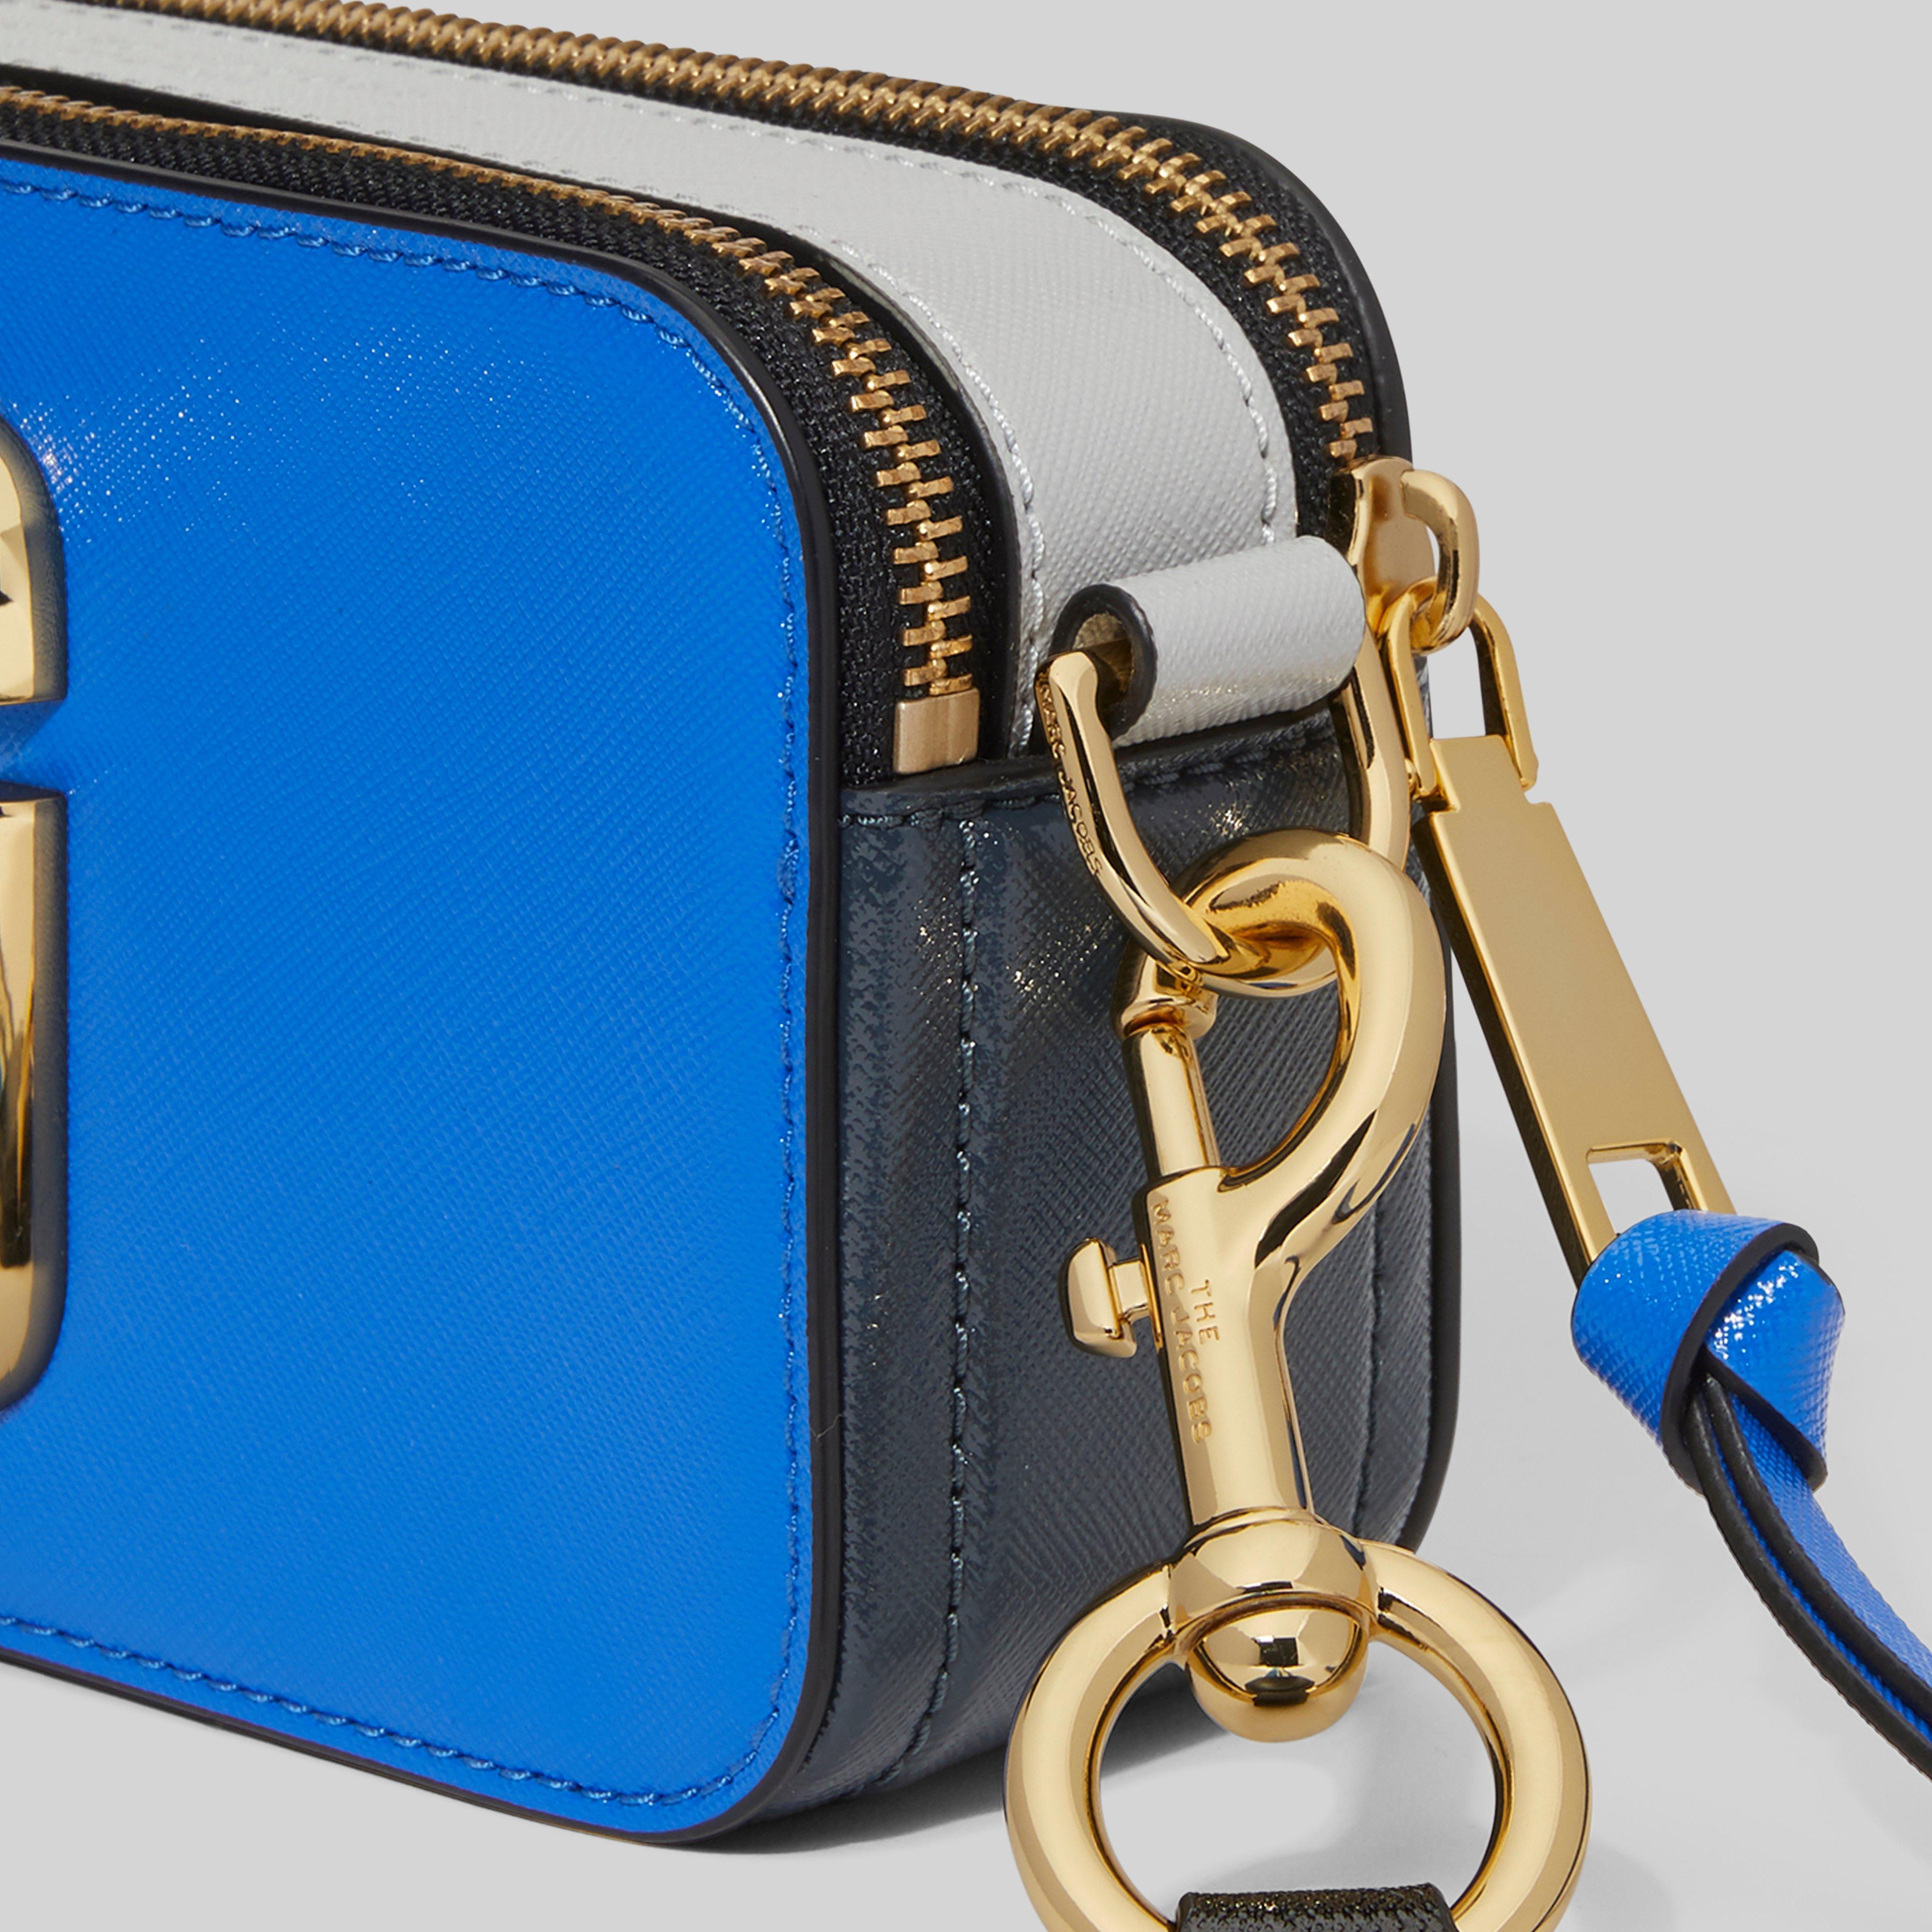 Sell Marc Jacobs Snapshot Bag - Blue